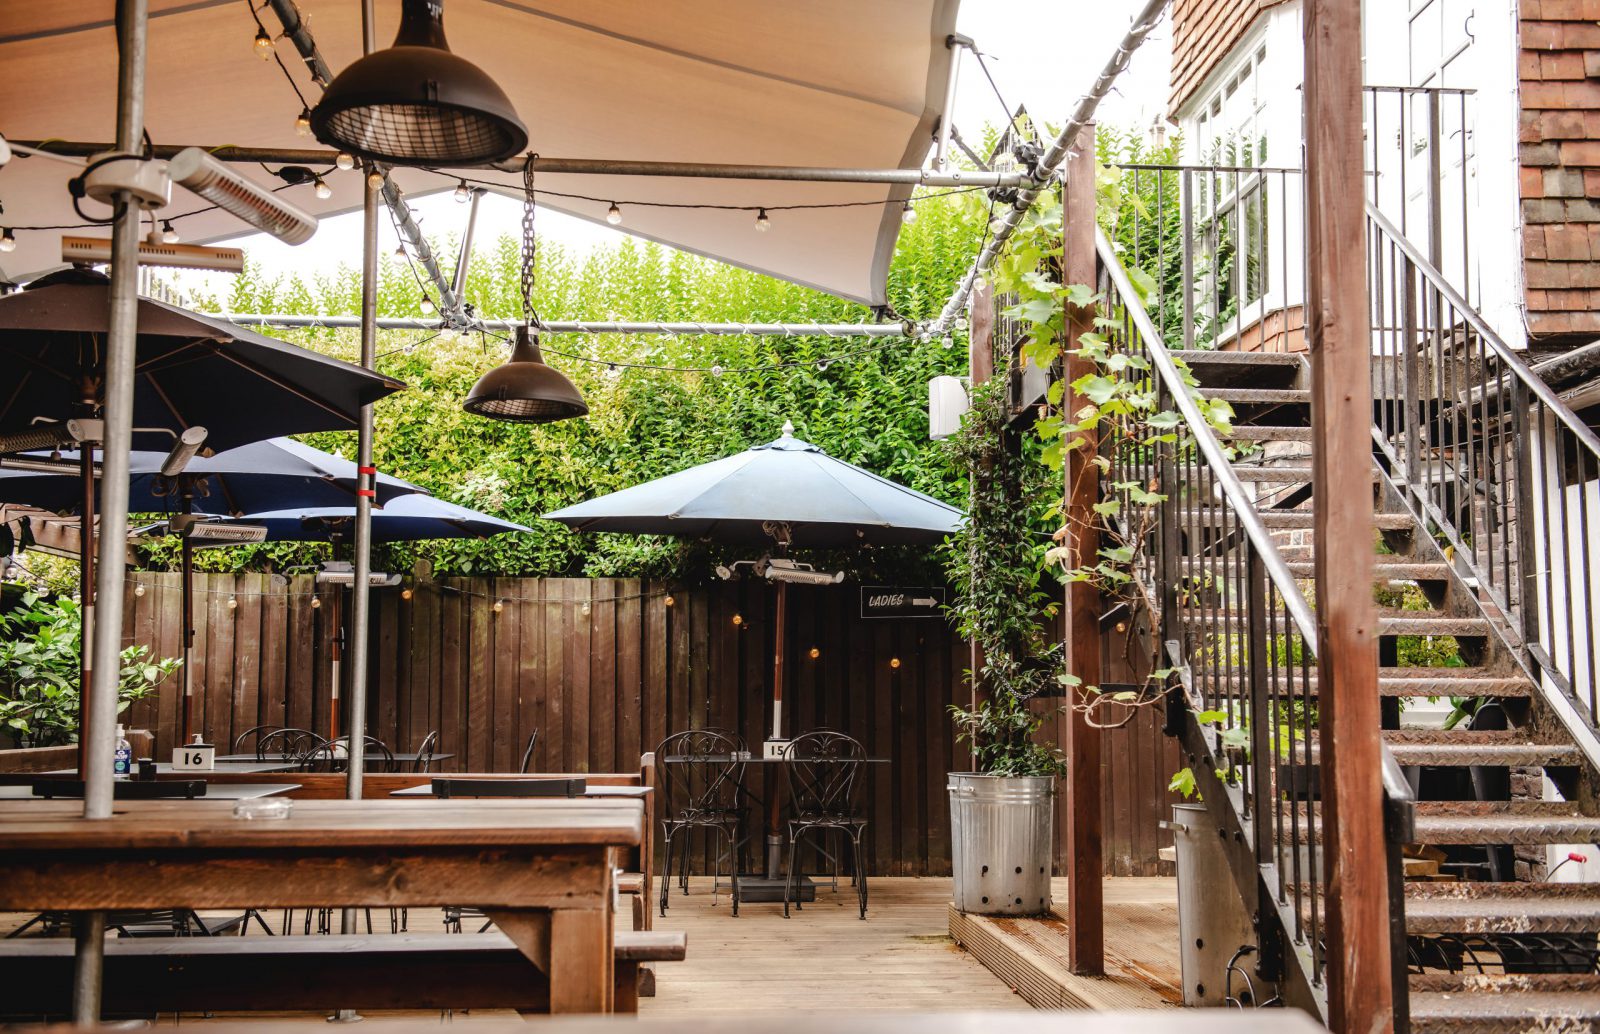 The George pub garden with heaters and large benches covered by an all-weather canopy